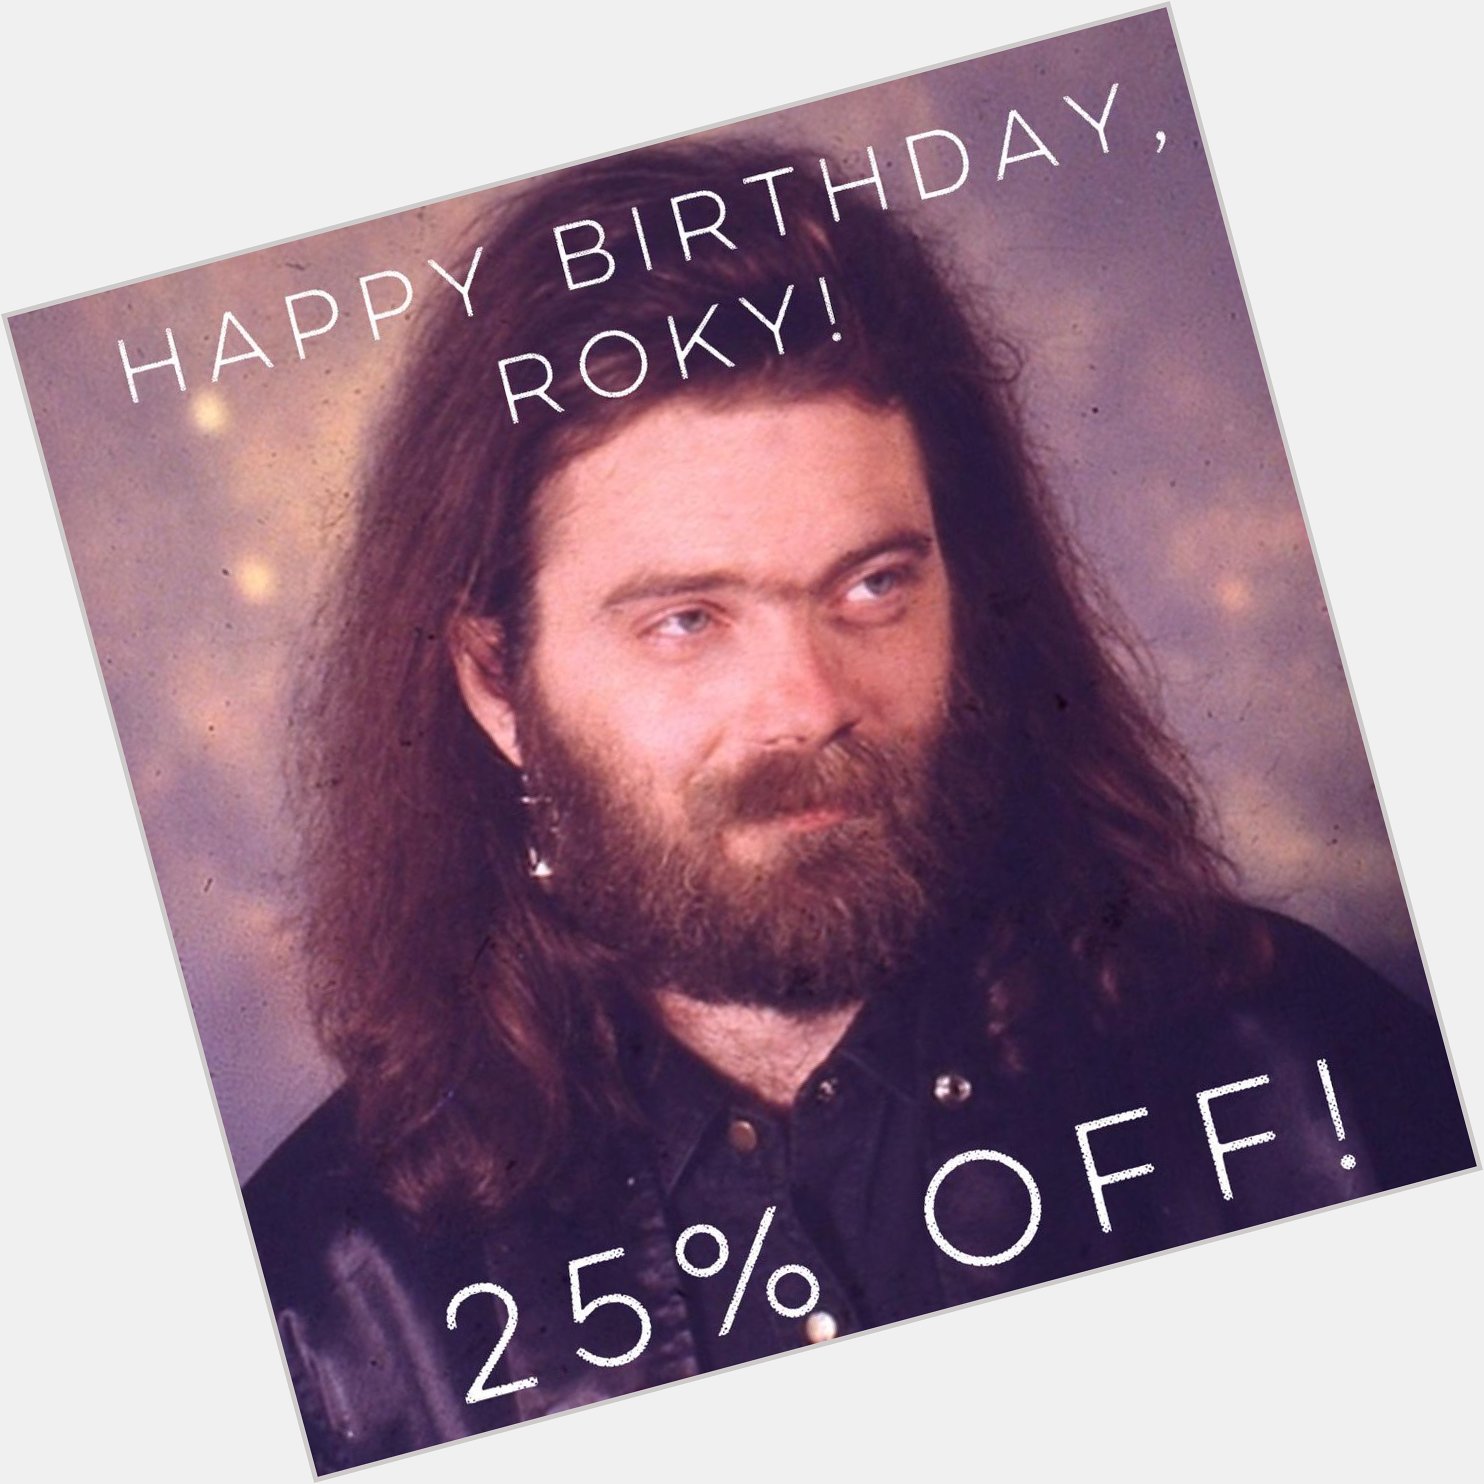  Happy Birthday, Roky!! 25% off our Roky reissues to celebrate!  . 